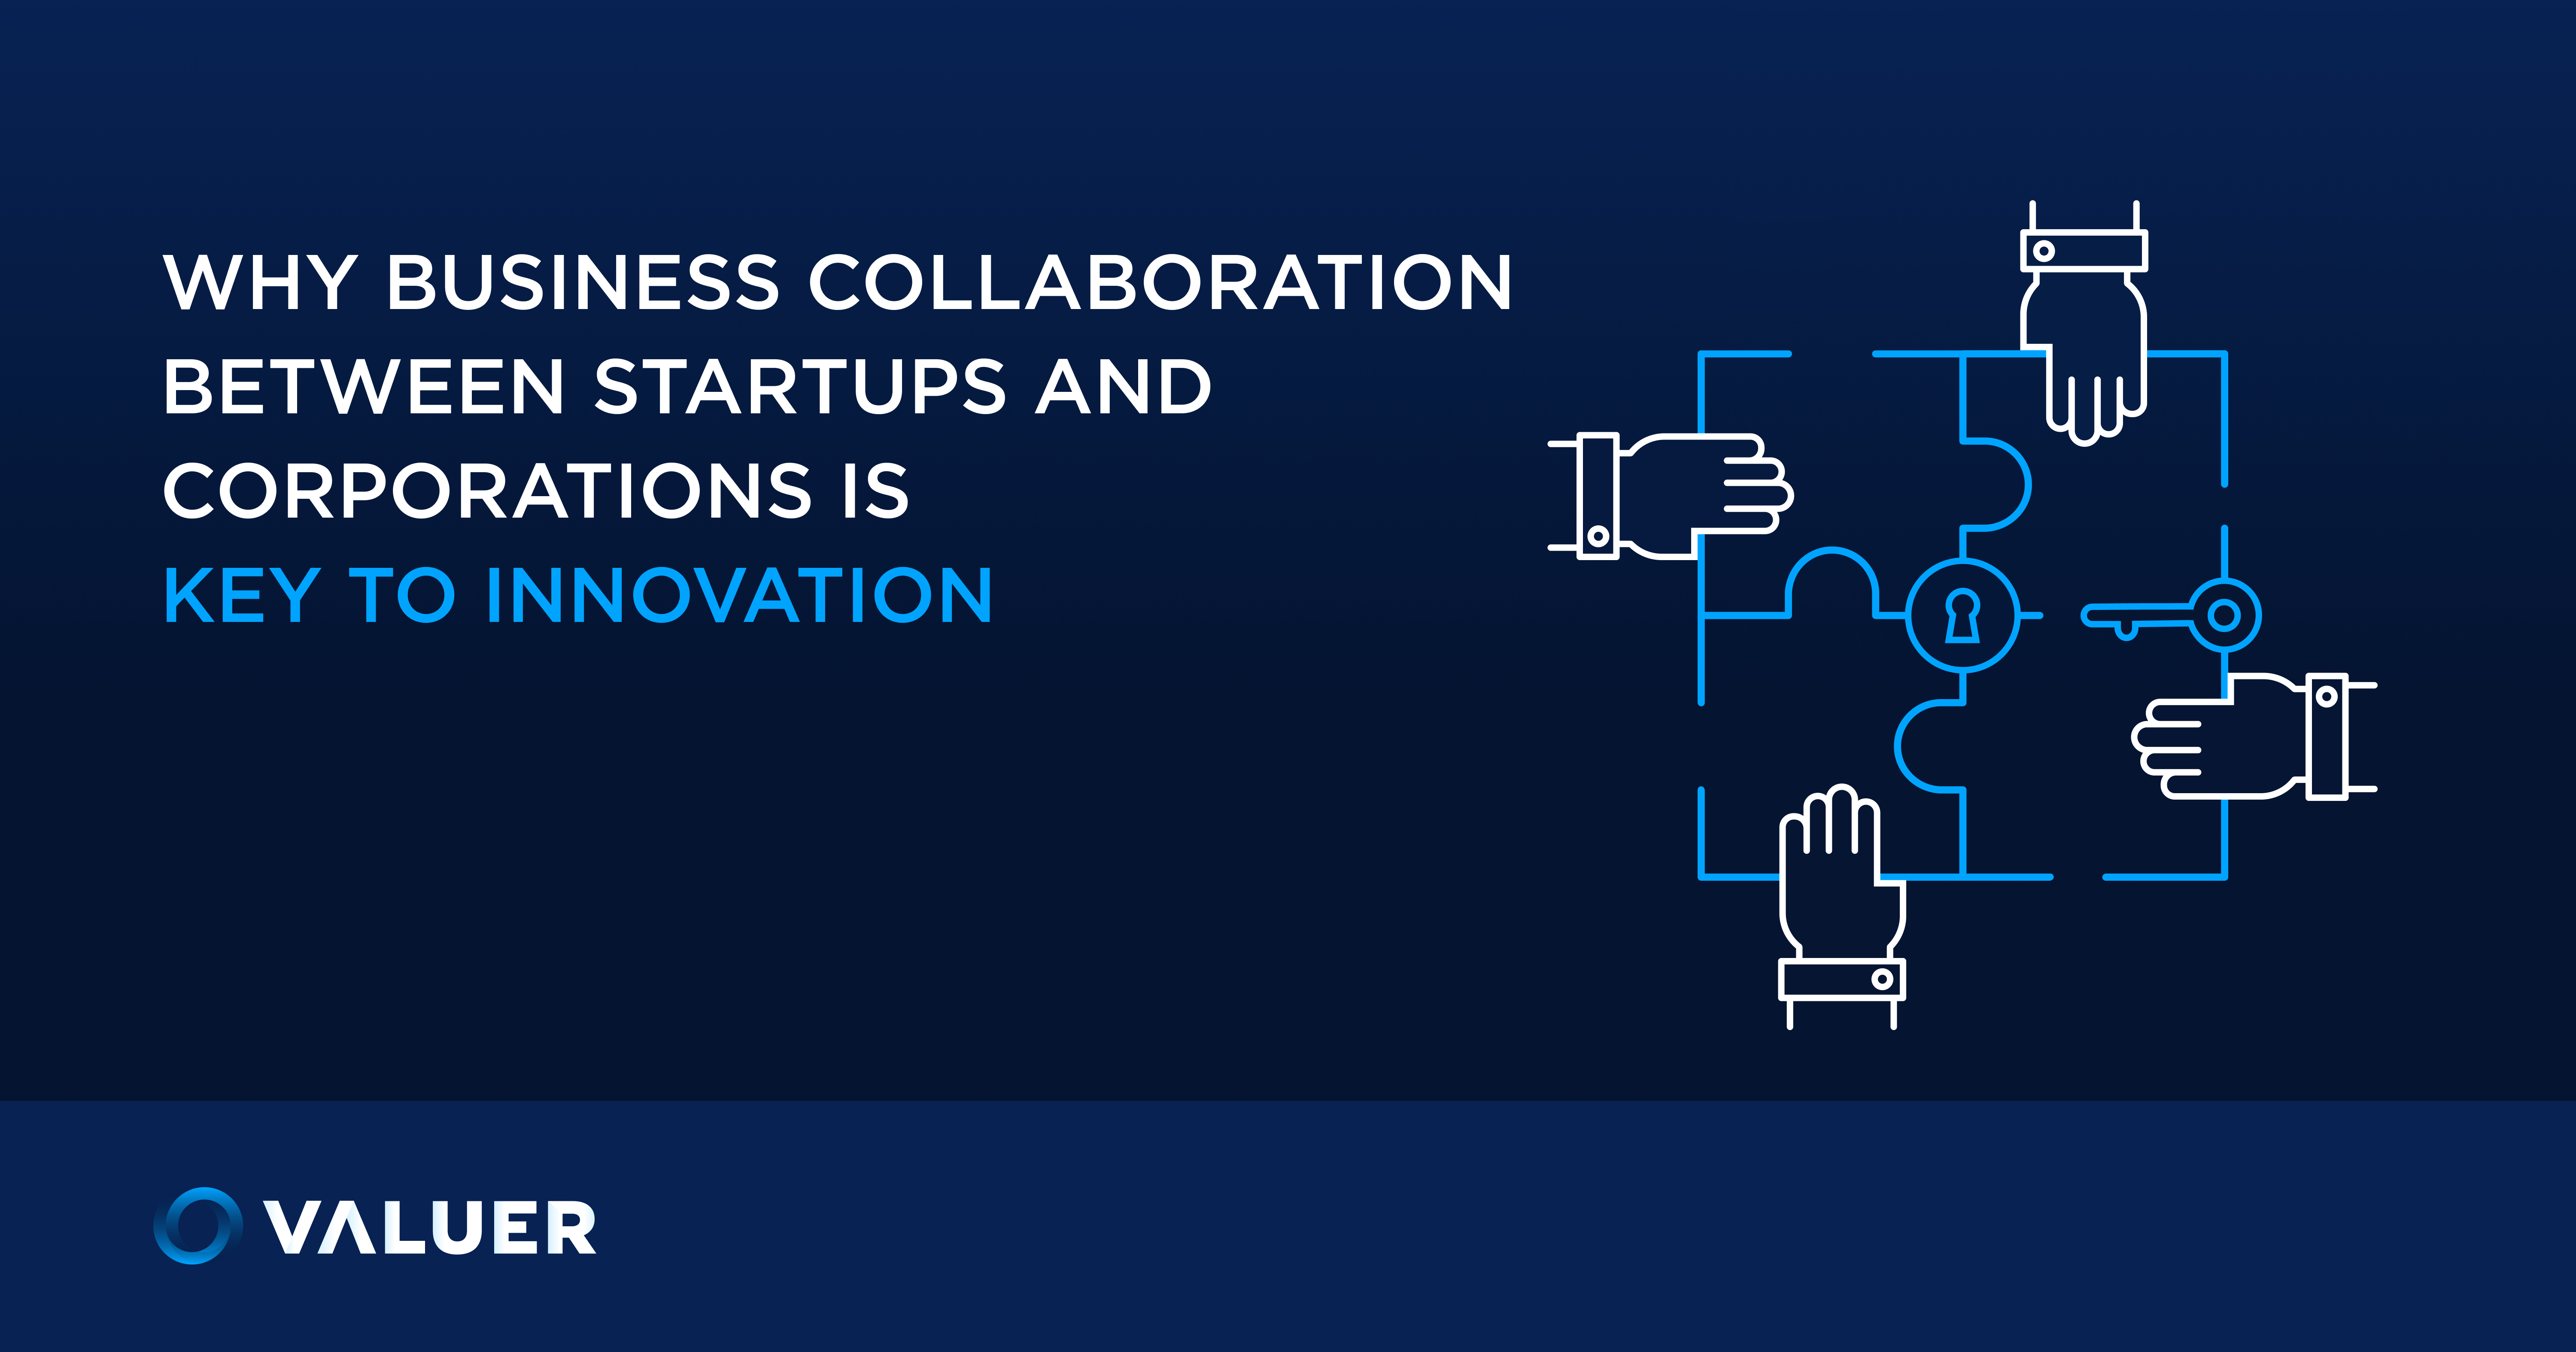 Corporate Startup Collaboration: The Key to Innovation